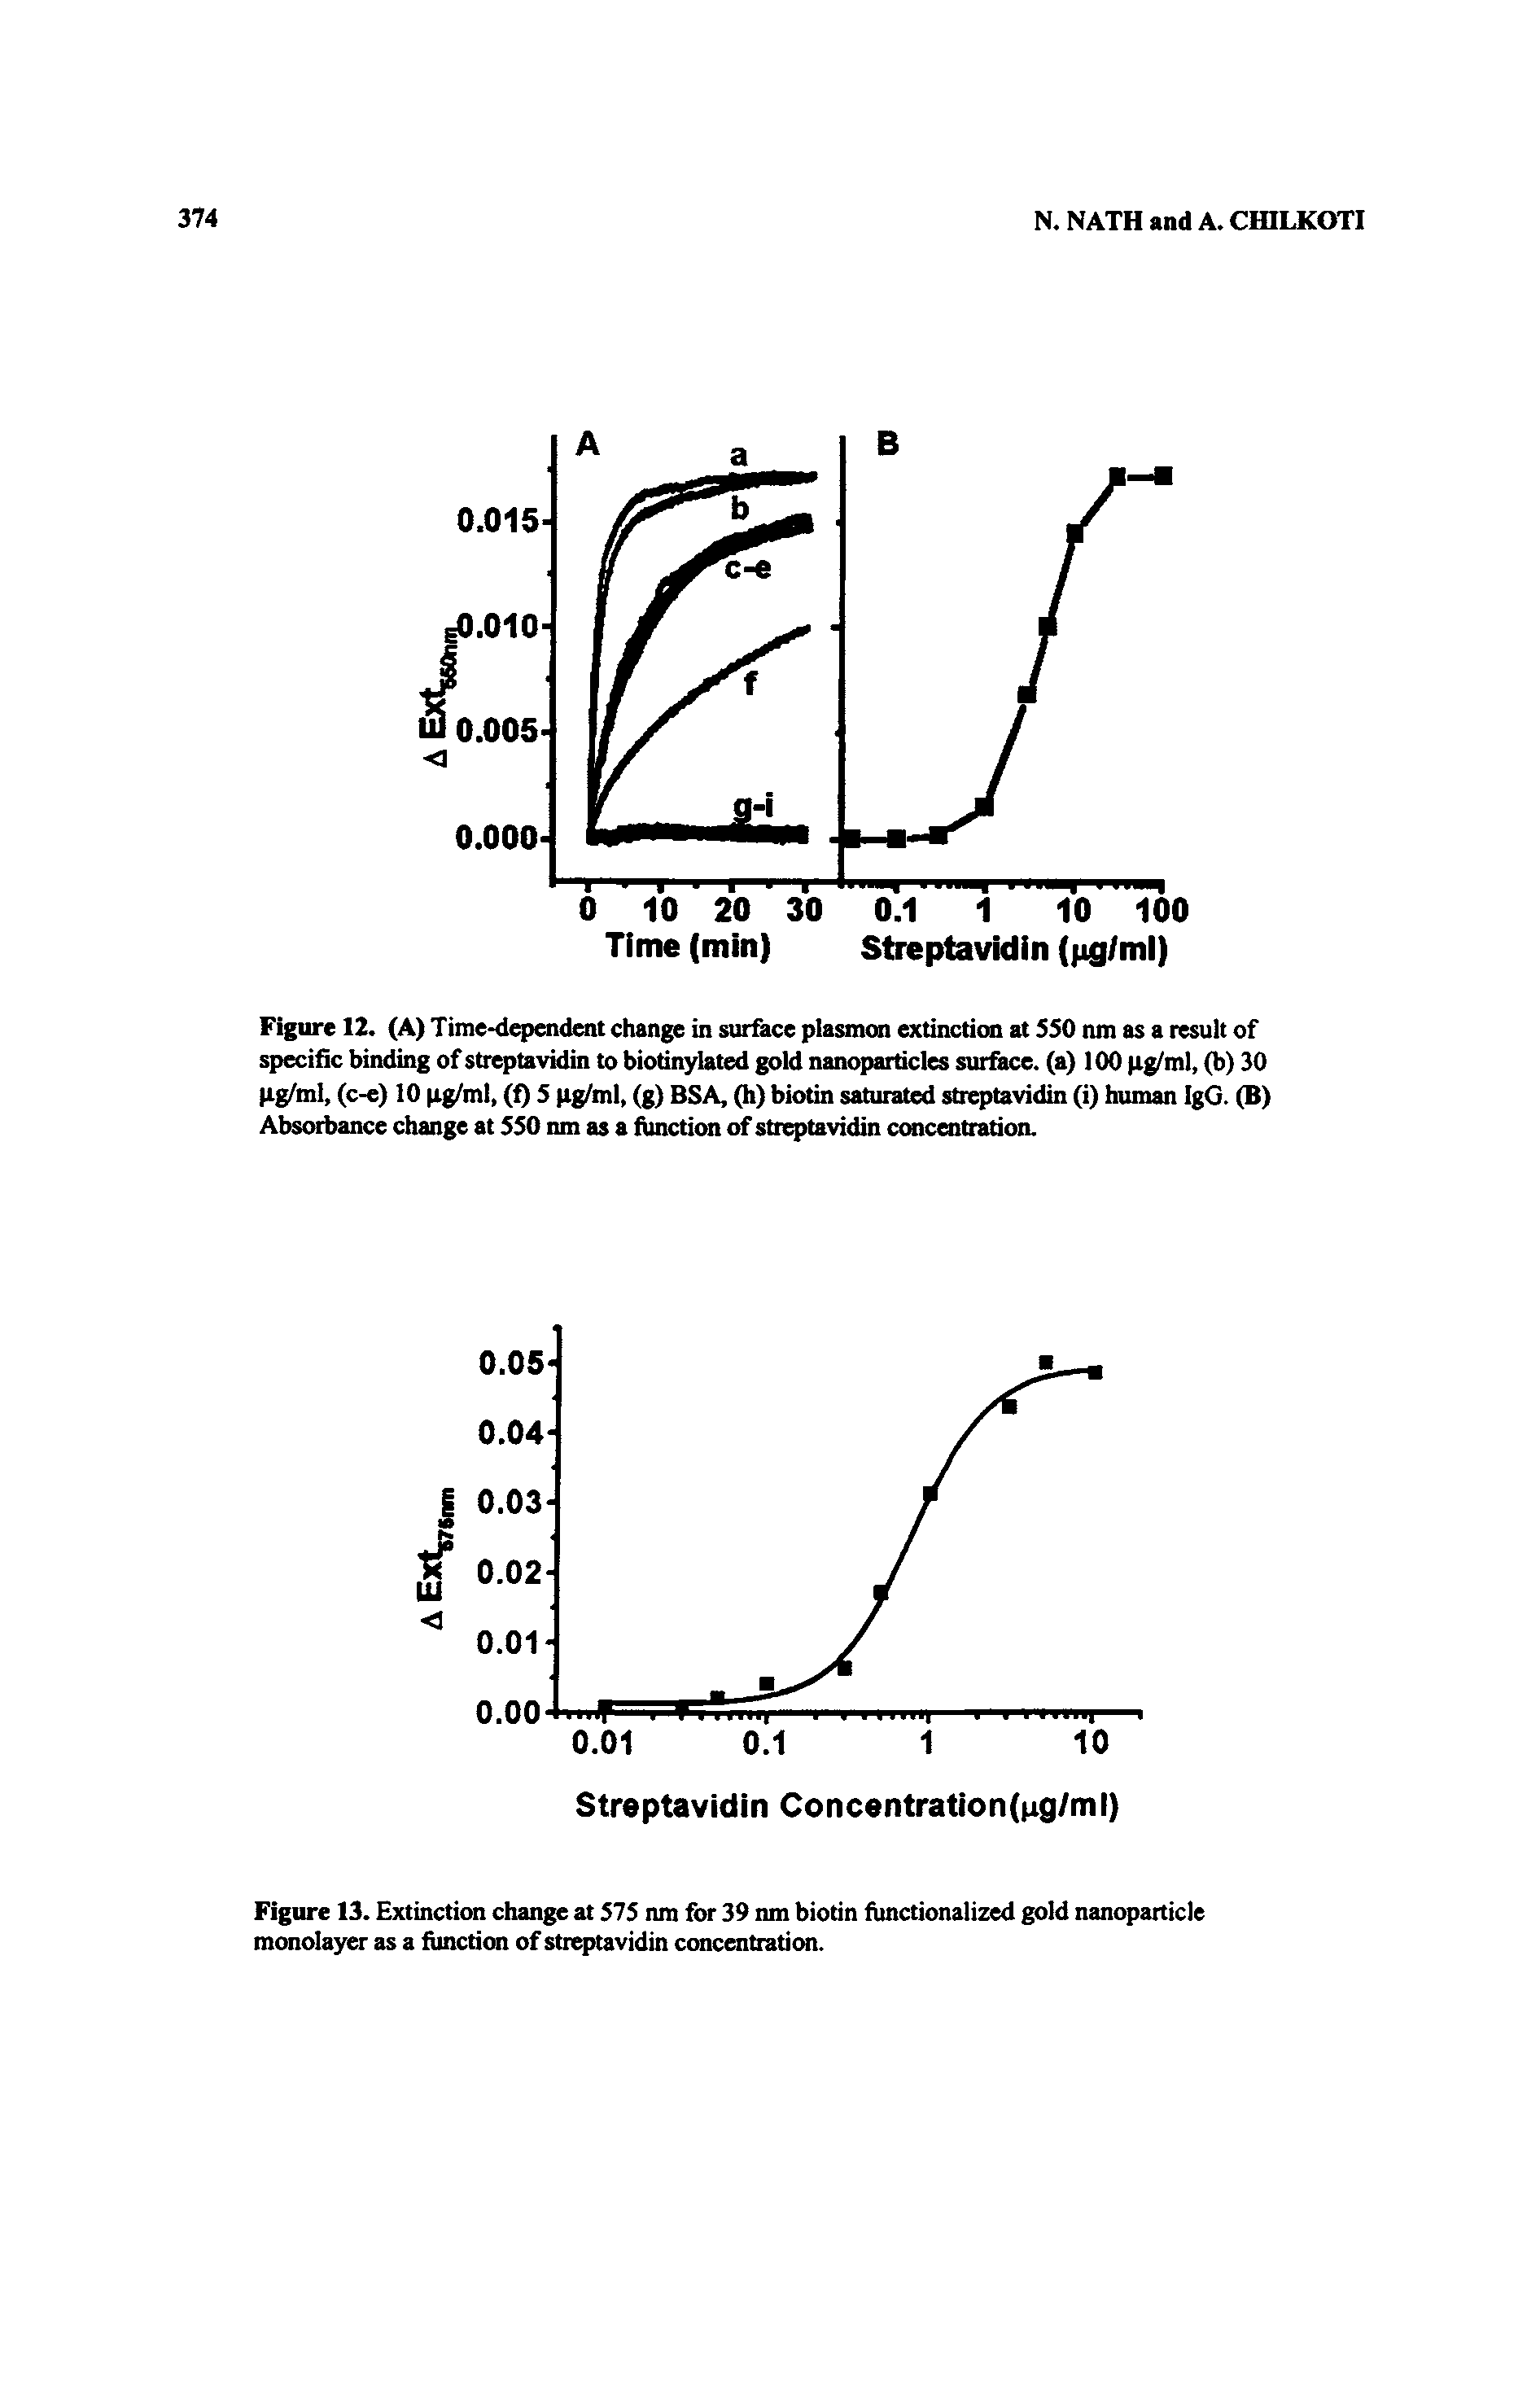 Figure 13. Extinction change at 575 nm for 39 nm biotin fiinctionalized gold nanopatticle montdayo- as a fiinctian of streptavidin concentration.